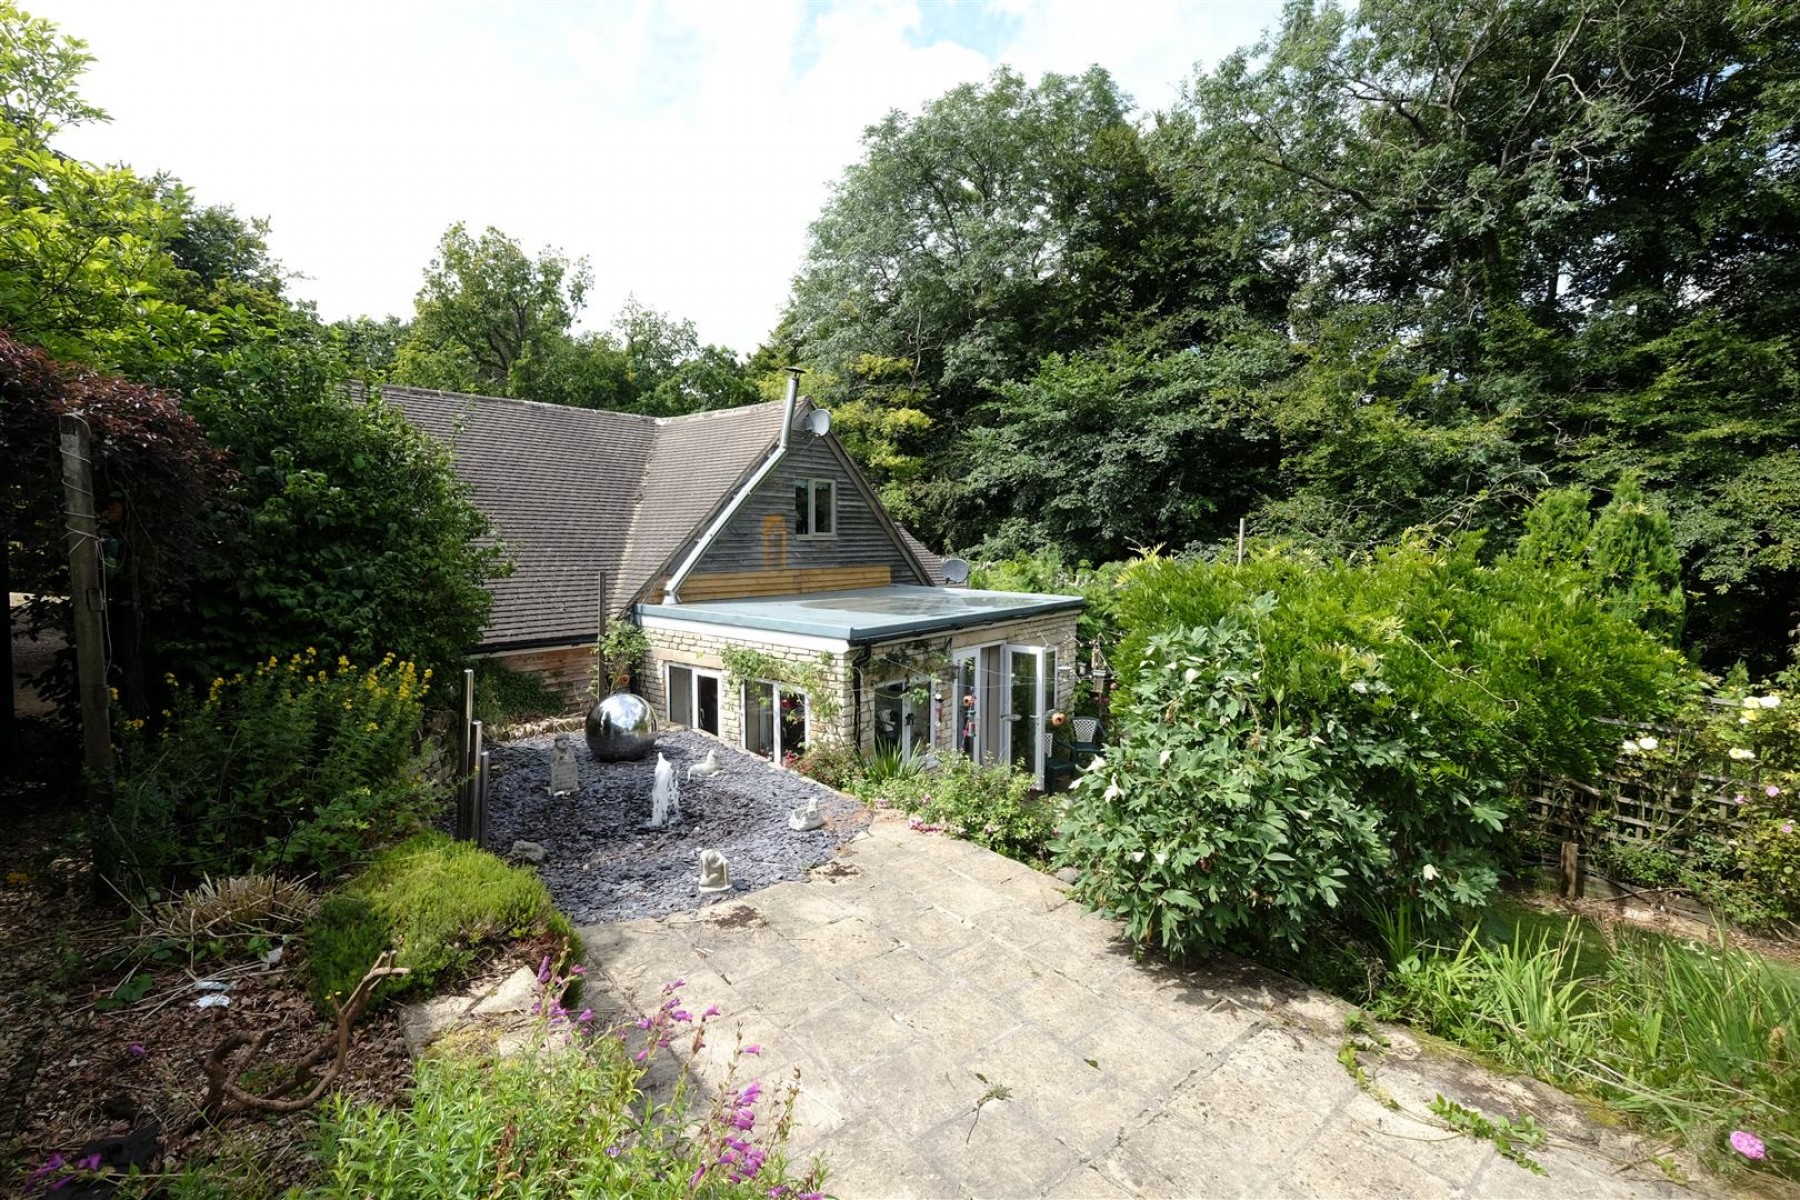 Images for DETACHED HOUSE - REDUCED PRICE FOR AUCTION